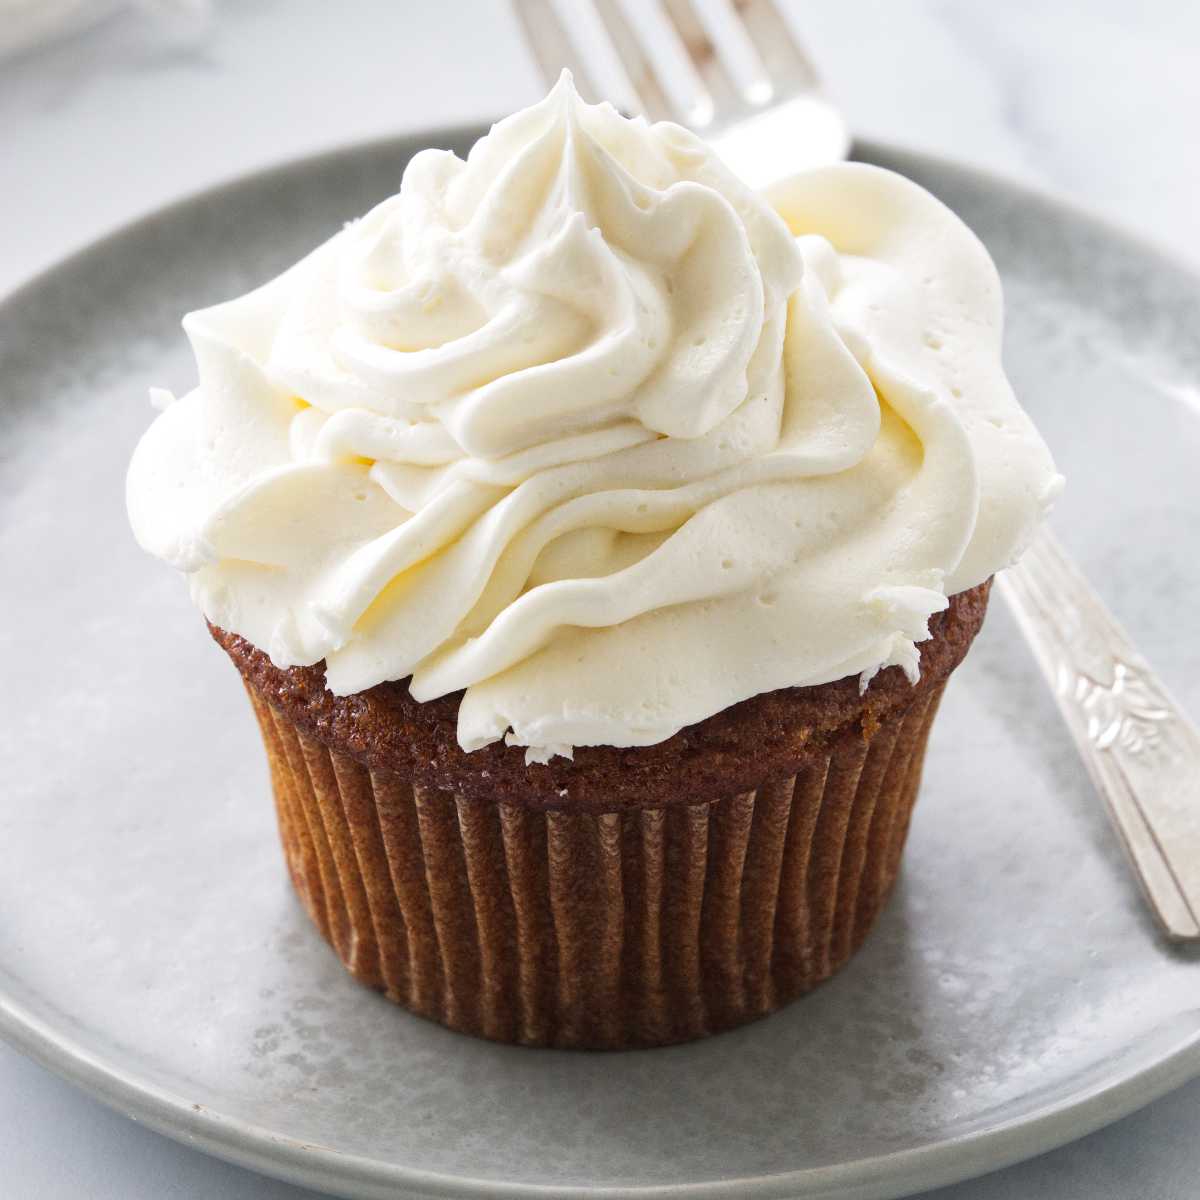 A serving of a frosted cupcake on a plate with a fork.